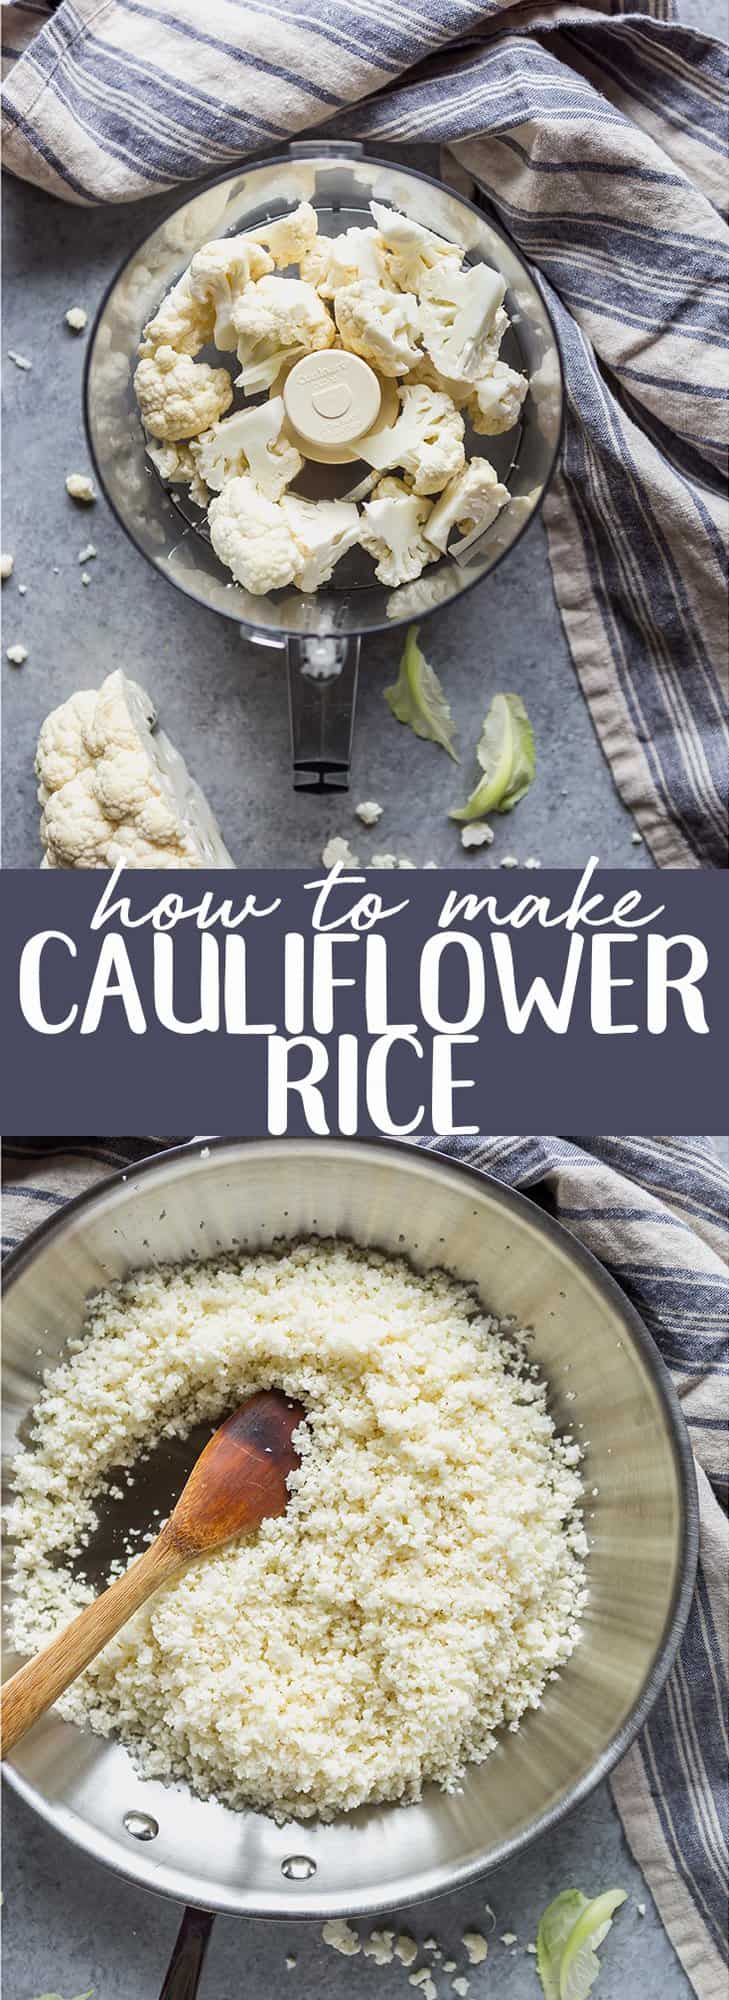 Learn how to make cauliflower rice at home in less than 5 minutes! Two ways - you can use a food processor or not! This is a great low carb substitute in all kinds of recipes! |Whole 30 | Paleo | Gluten free | keto